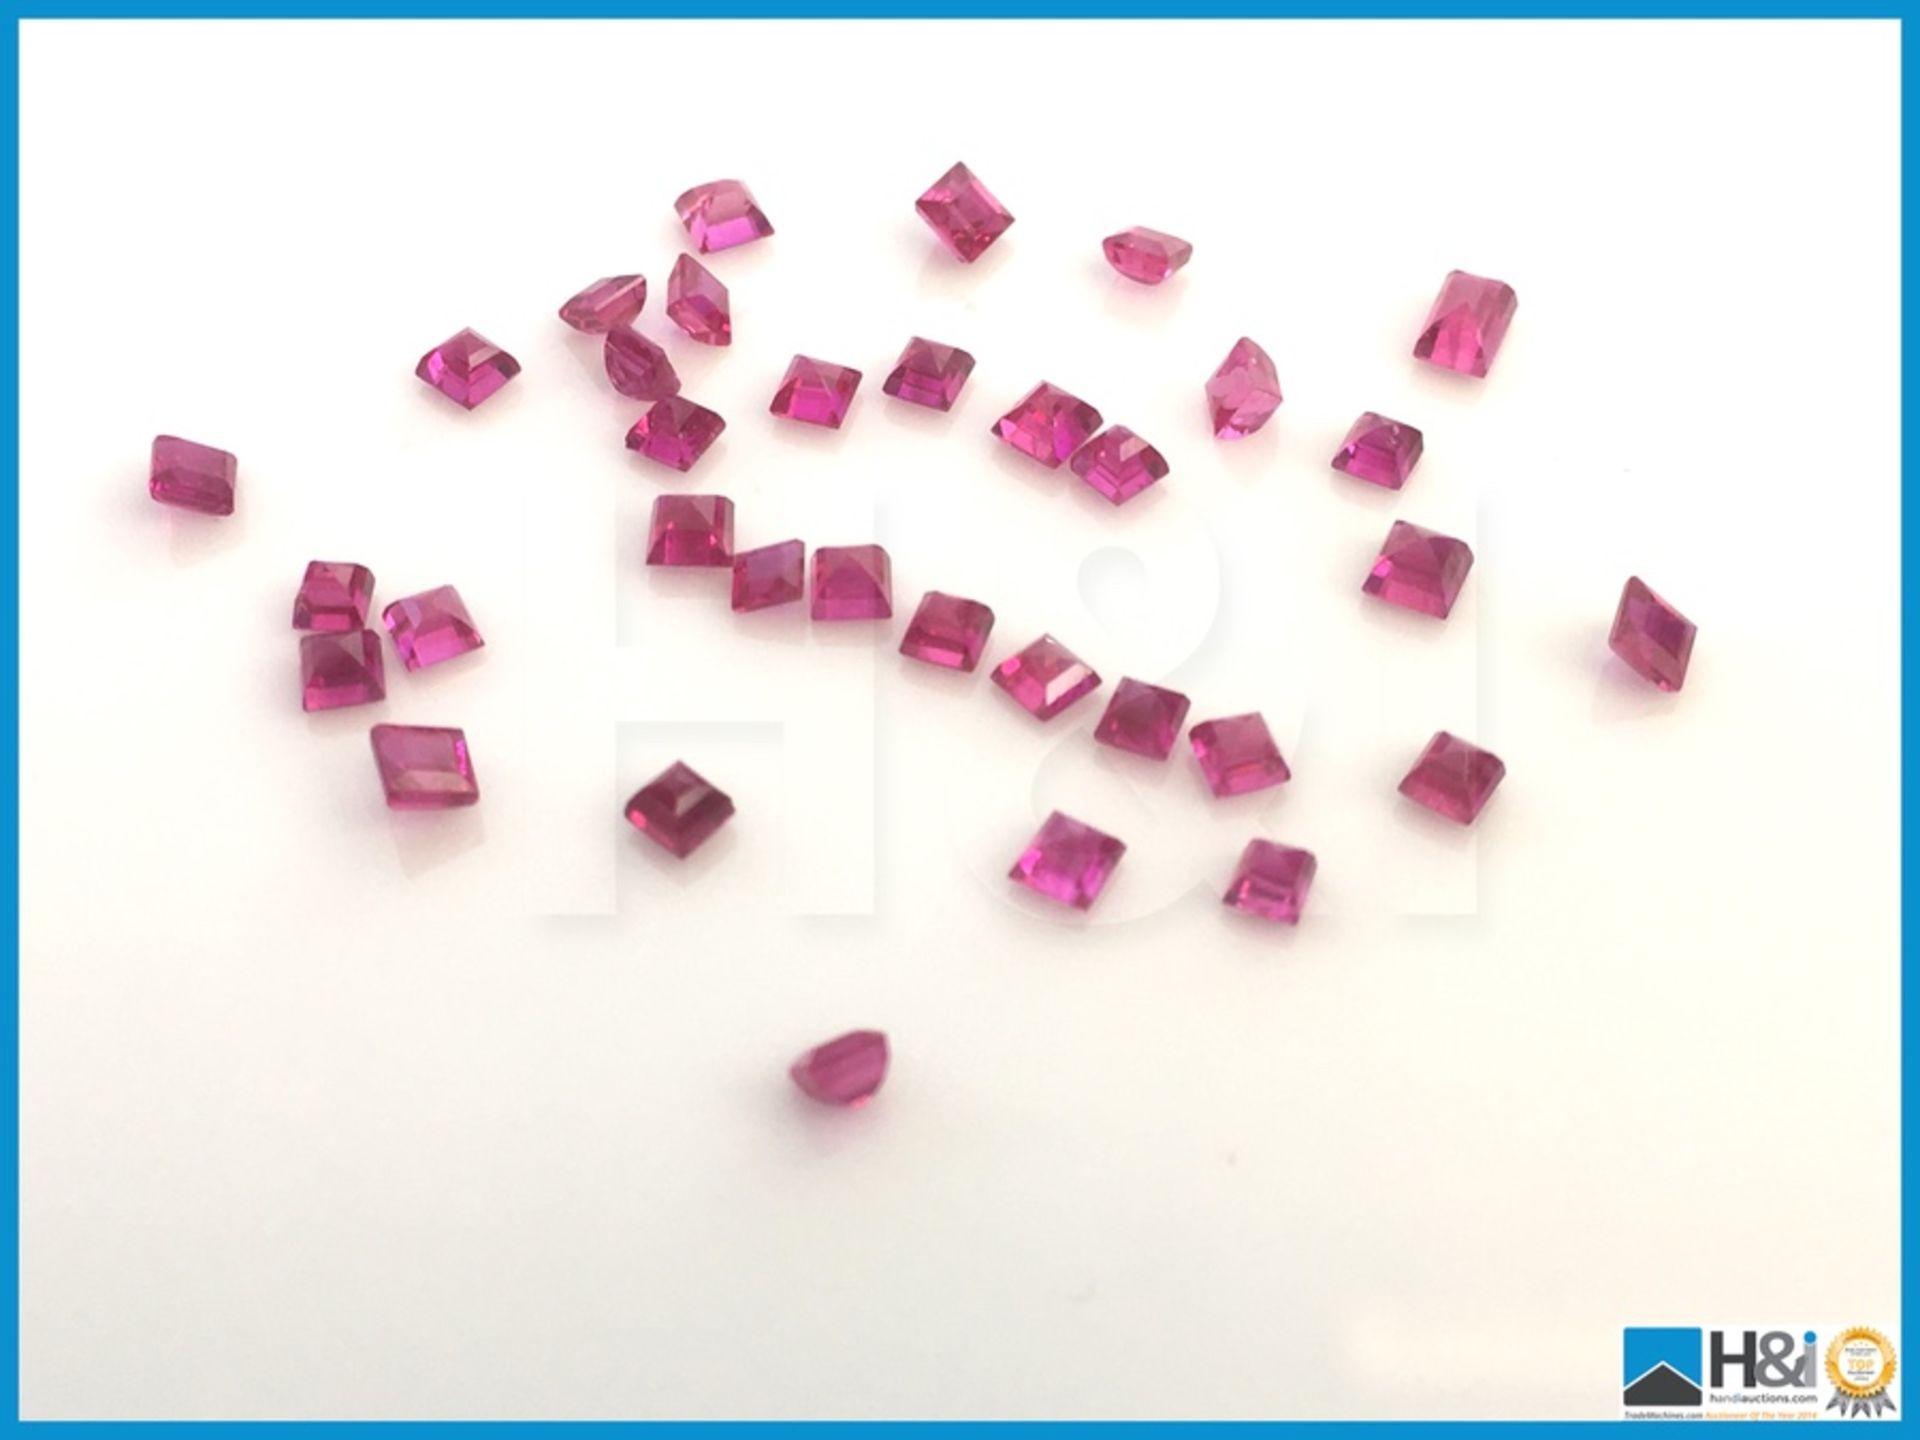 4.1ct Natural Rubies. Collection of 20+ Square cut red Rubies . Certification: None Appraisal: